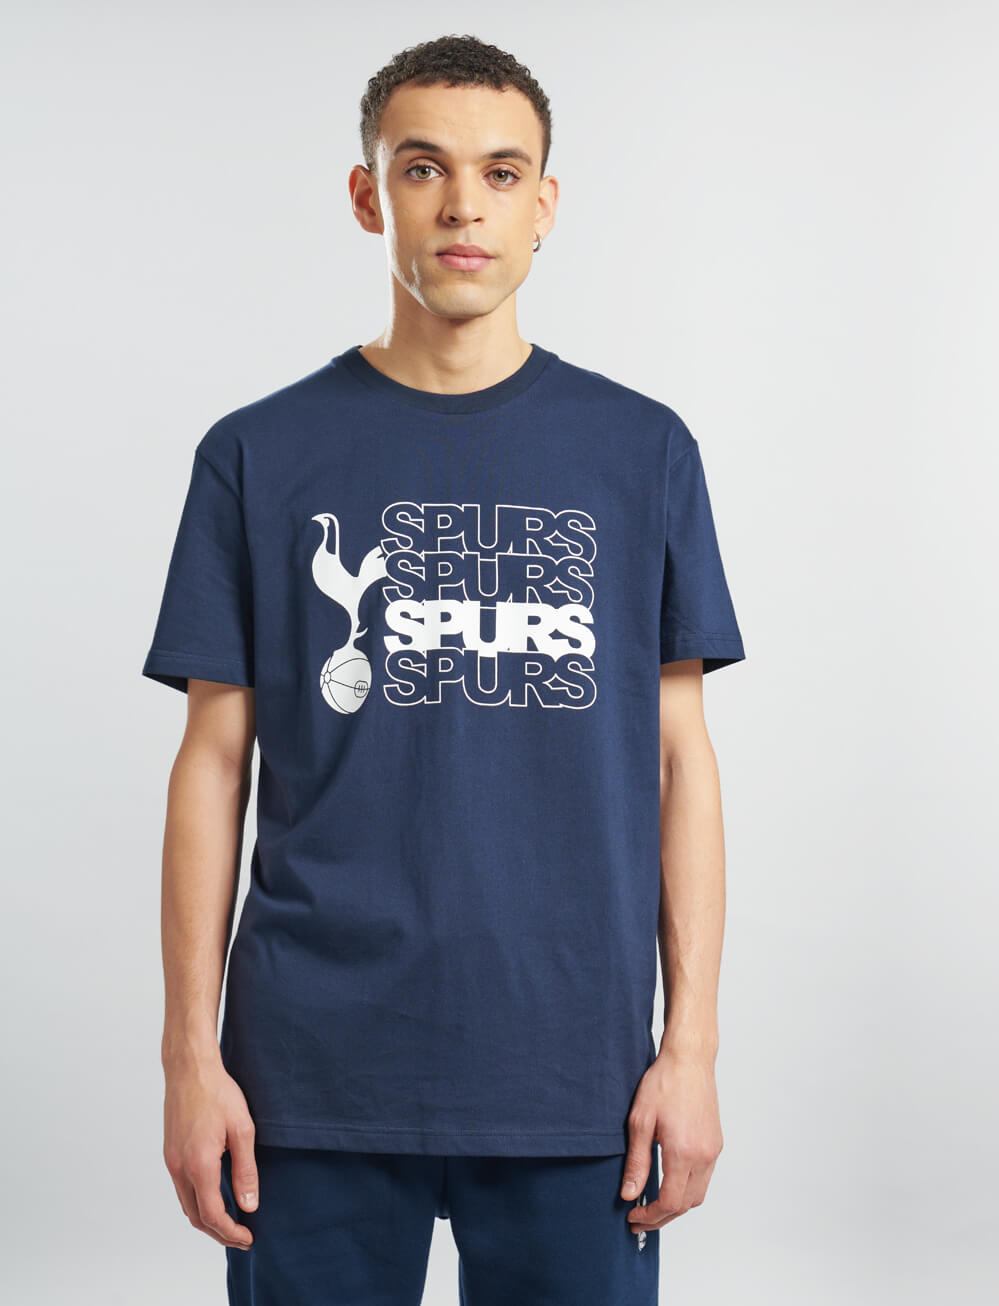 Official Tottenham Graphic T-Shirt - Navy - The World Football Store